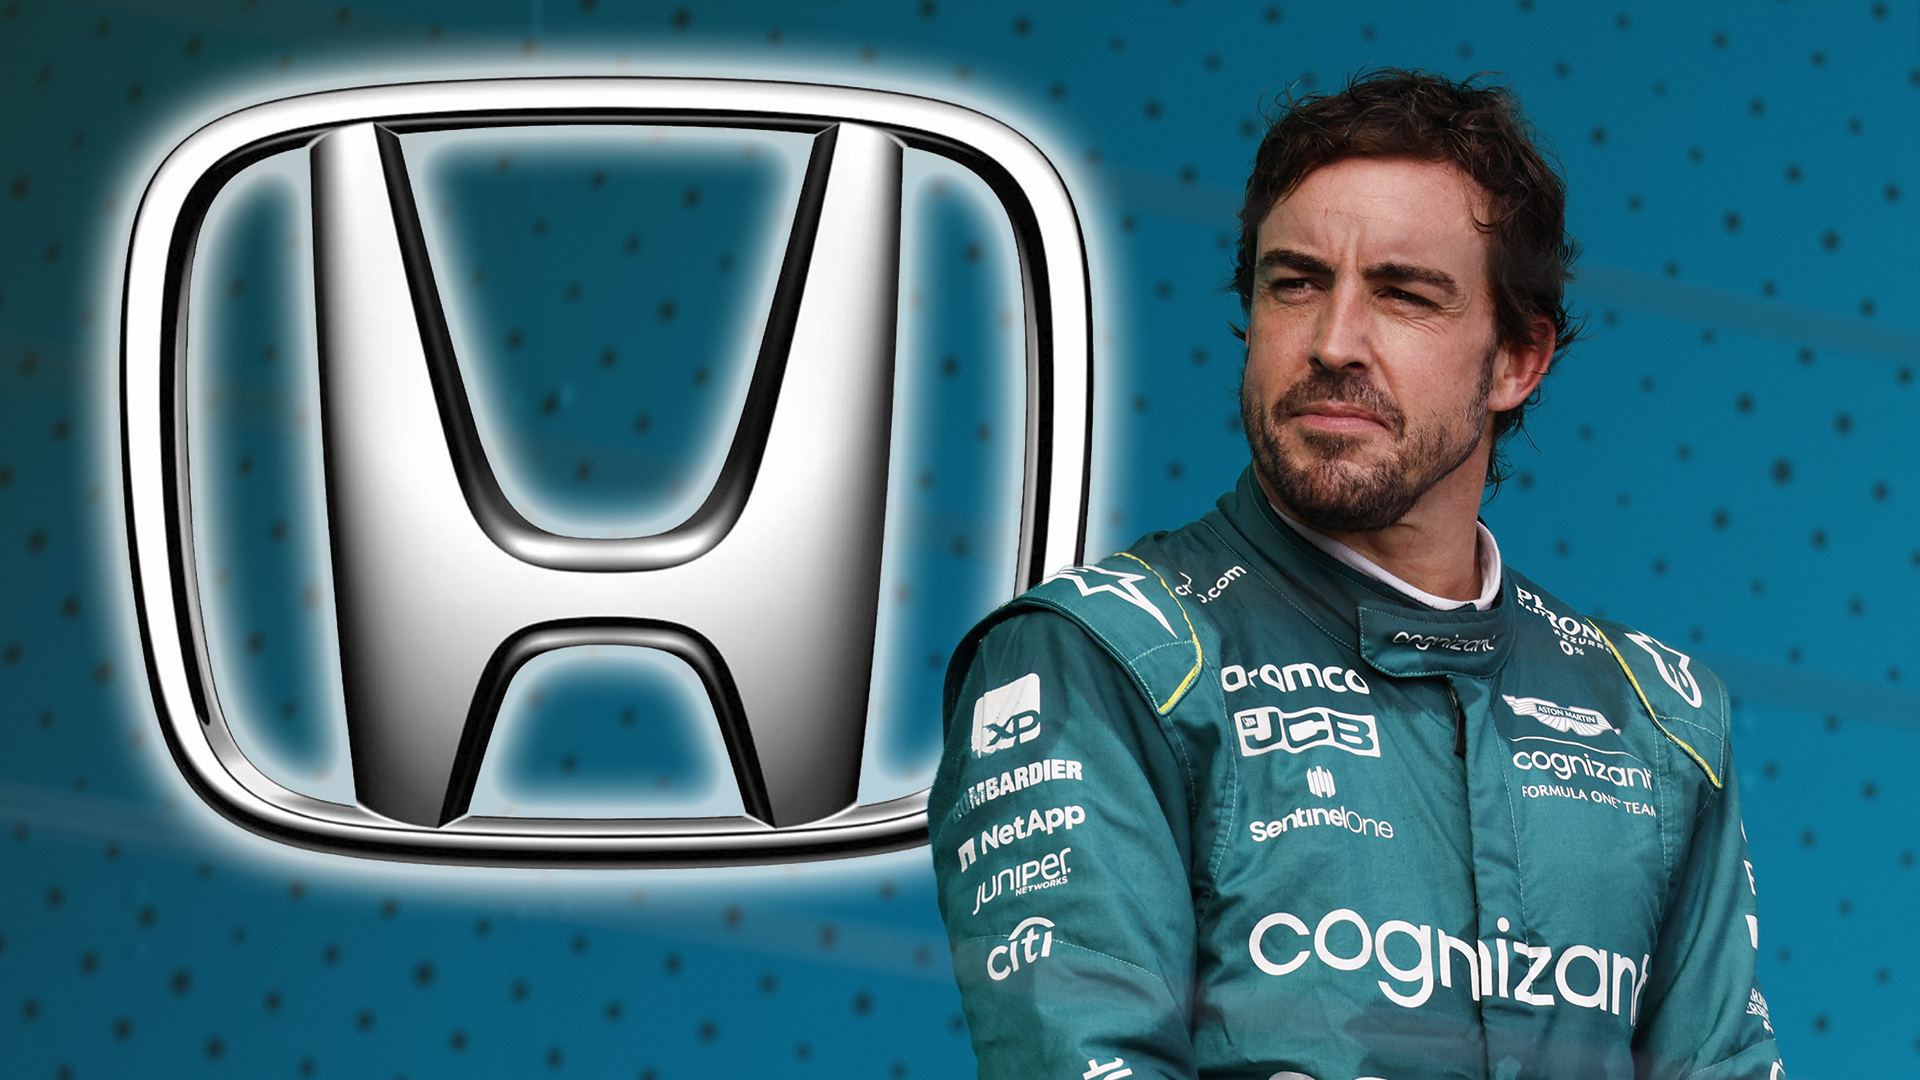 Honda Has ‘No Objections’ to Reunion With Alonso at Aston Martin